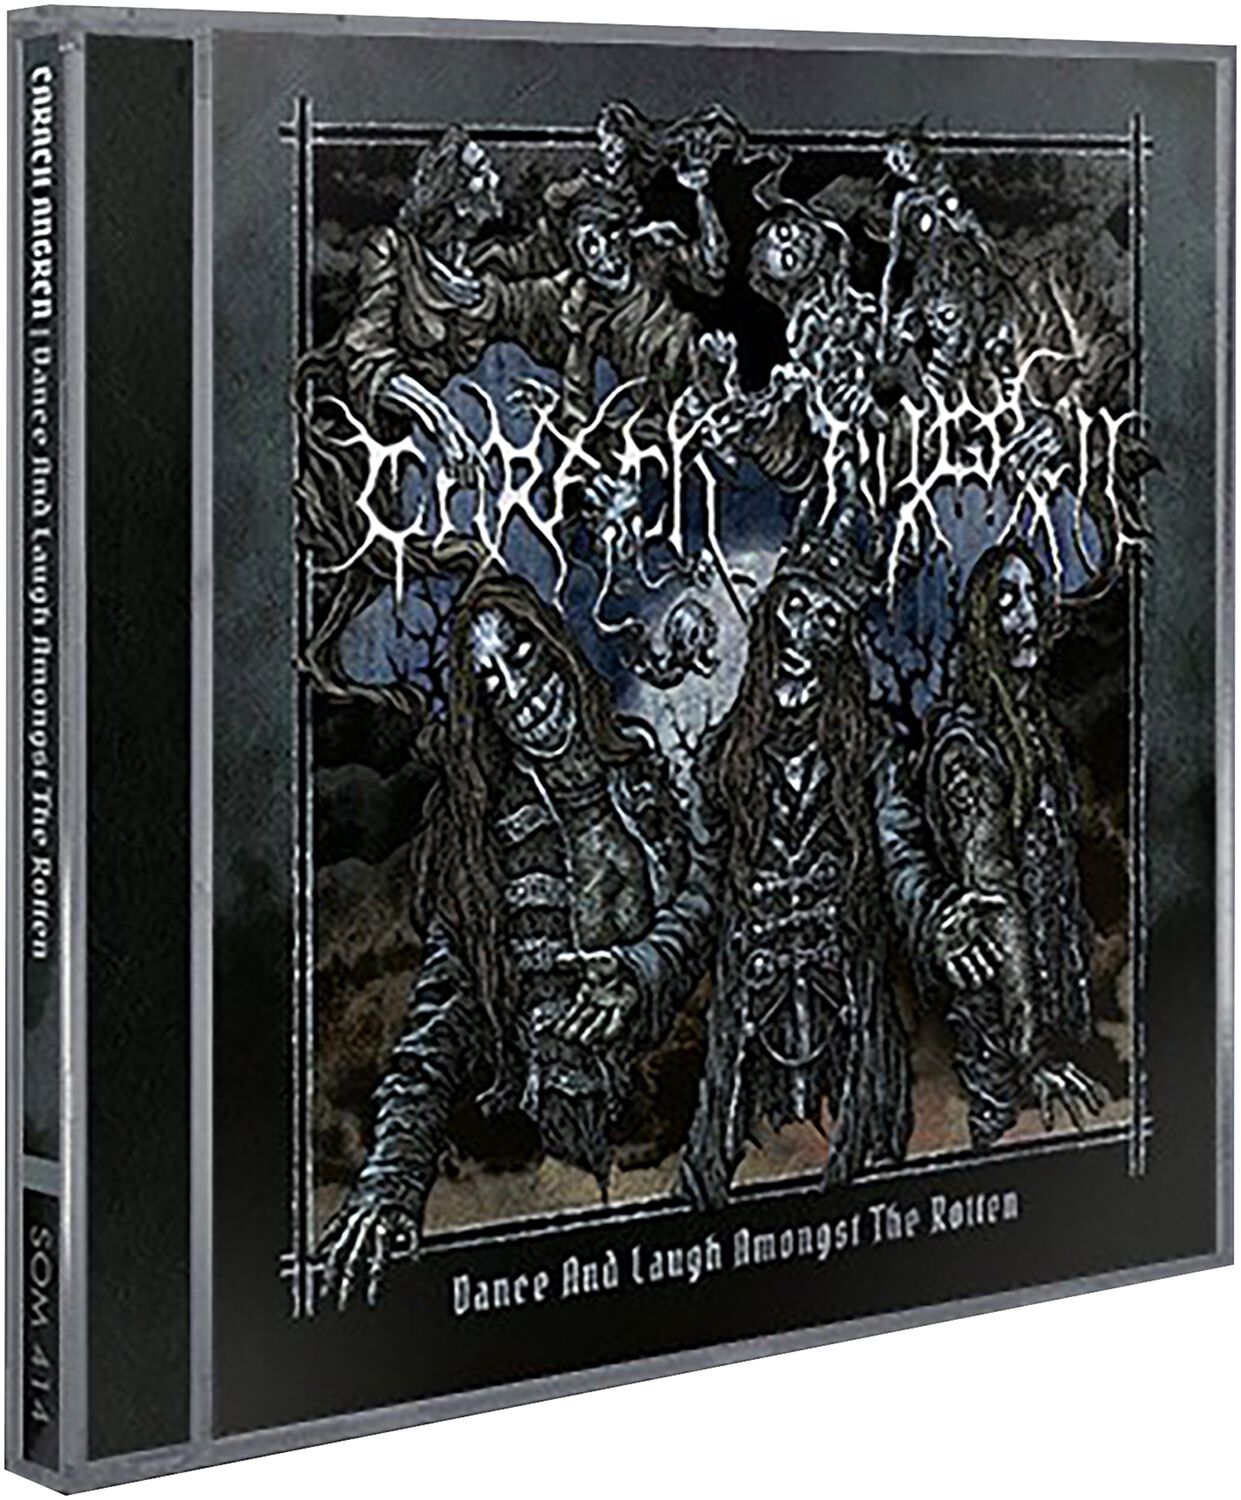 Image of Carach Angren Dance and laugh amongst the rotten CD Standard